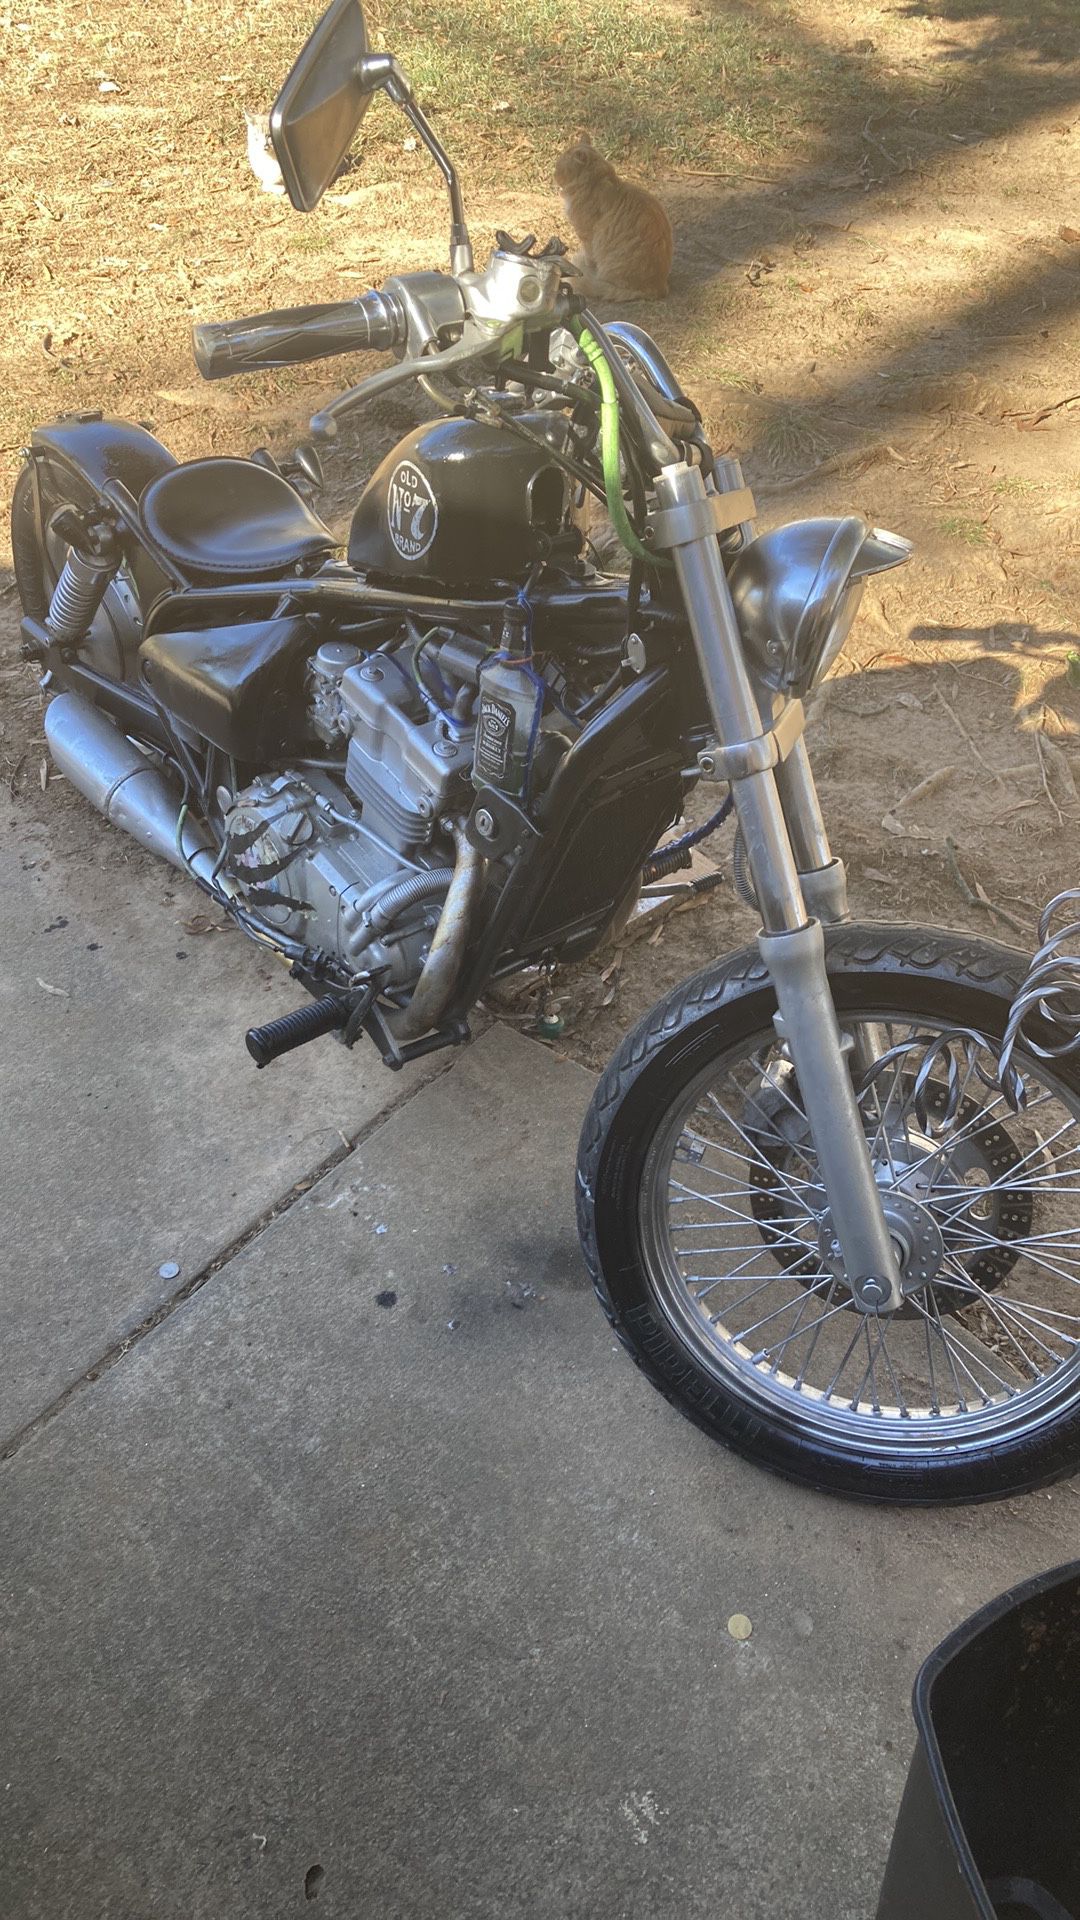 Kawasaki Motorcycle For Sale/trade For Vehicle Or Camper